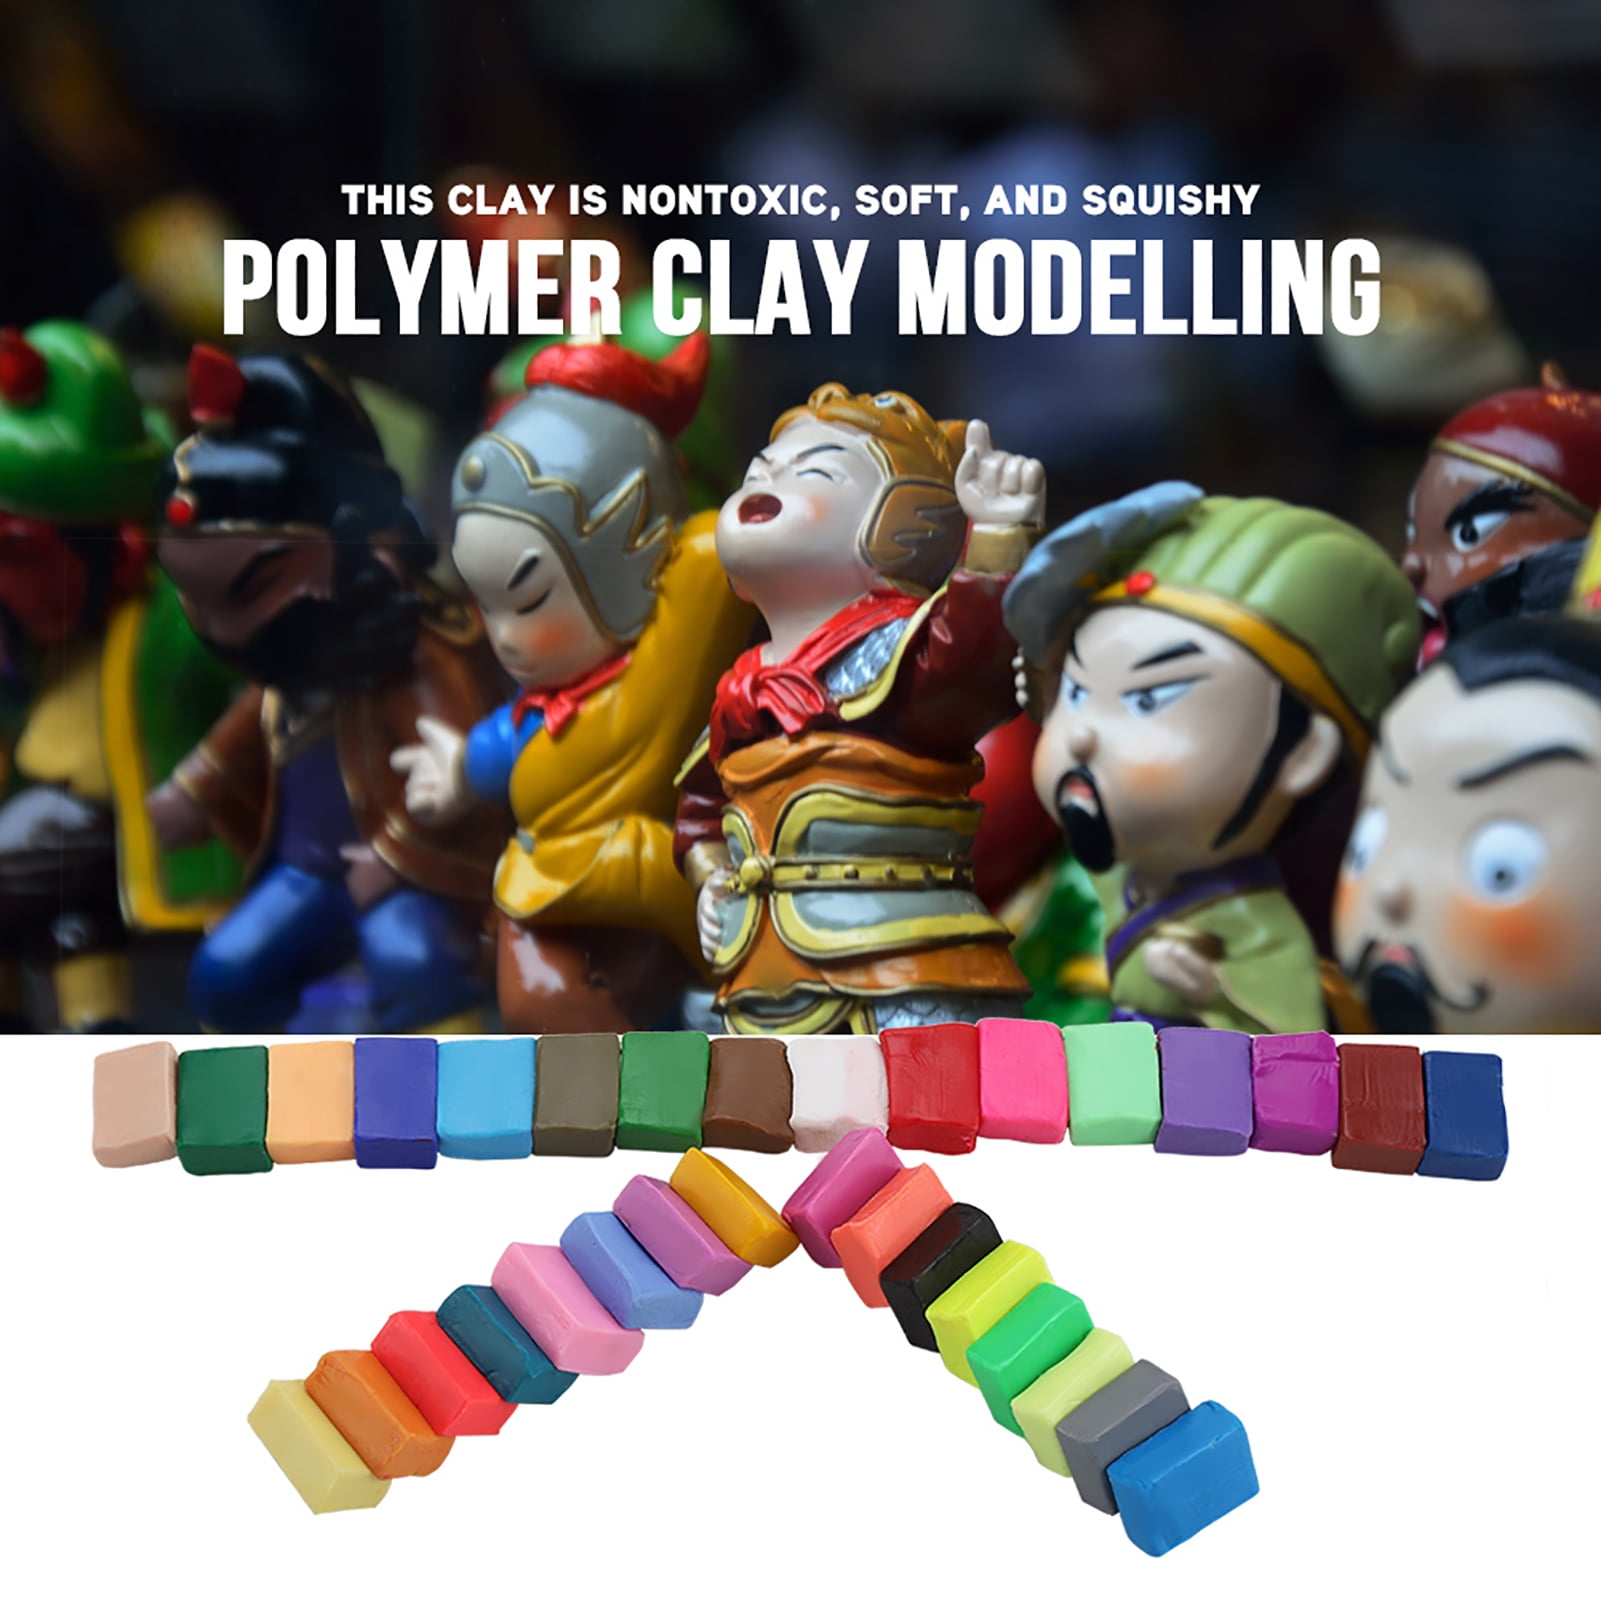 Polymer Clay Kit,DAOFARY 50 Color Modeling Clay Kit DIY Oven Bake Clay for  Kids and Adults with 5 Sculpting Tools, Accessories and Portable Storage